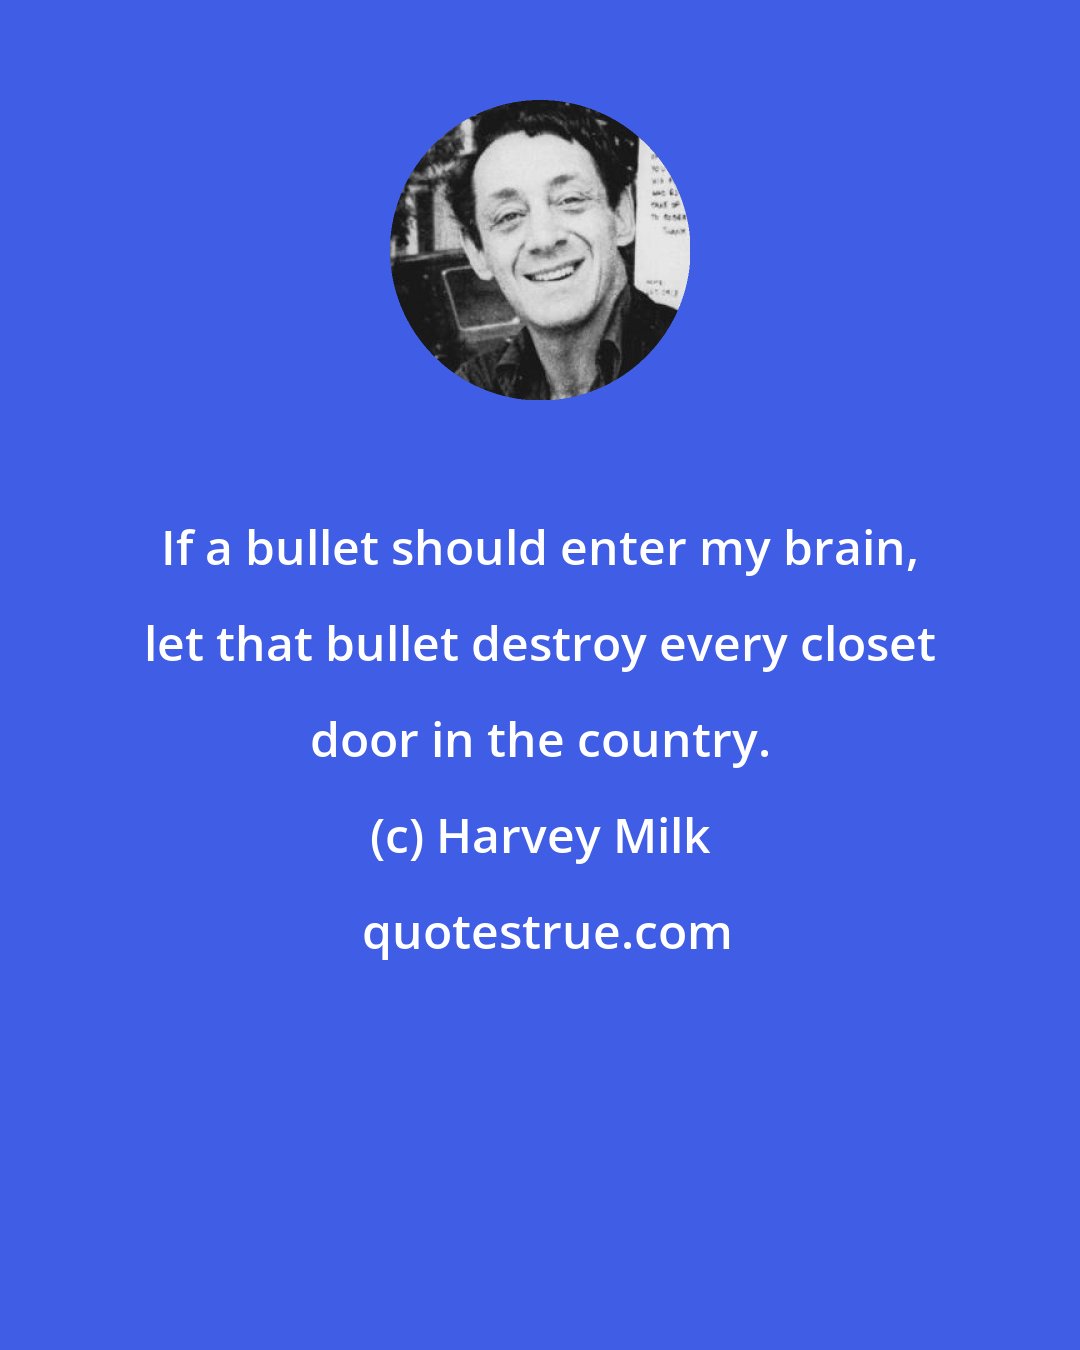 Harvey Milk: If a bullet should enter my brain, let that bullet destroy every closet door in the country.